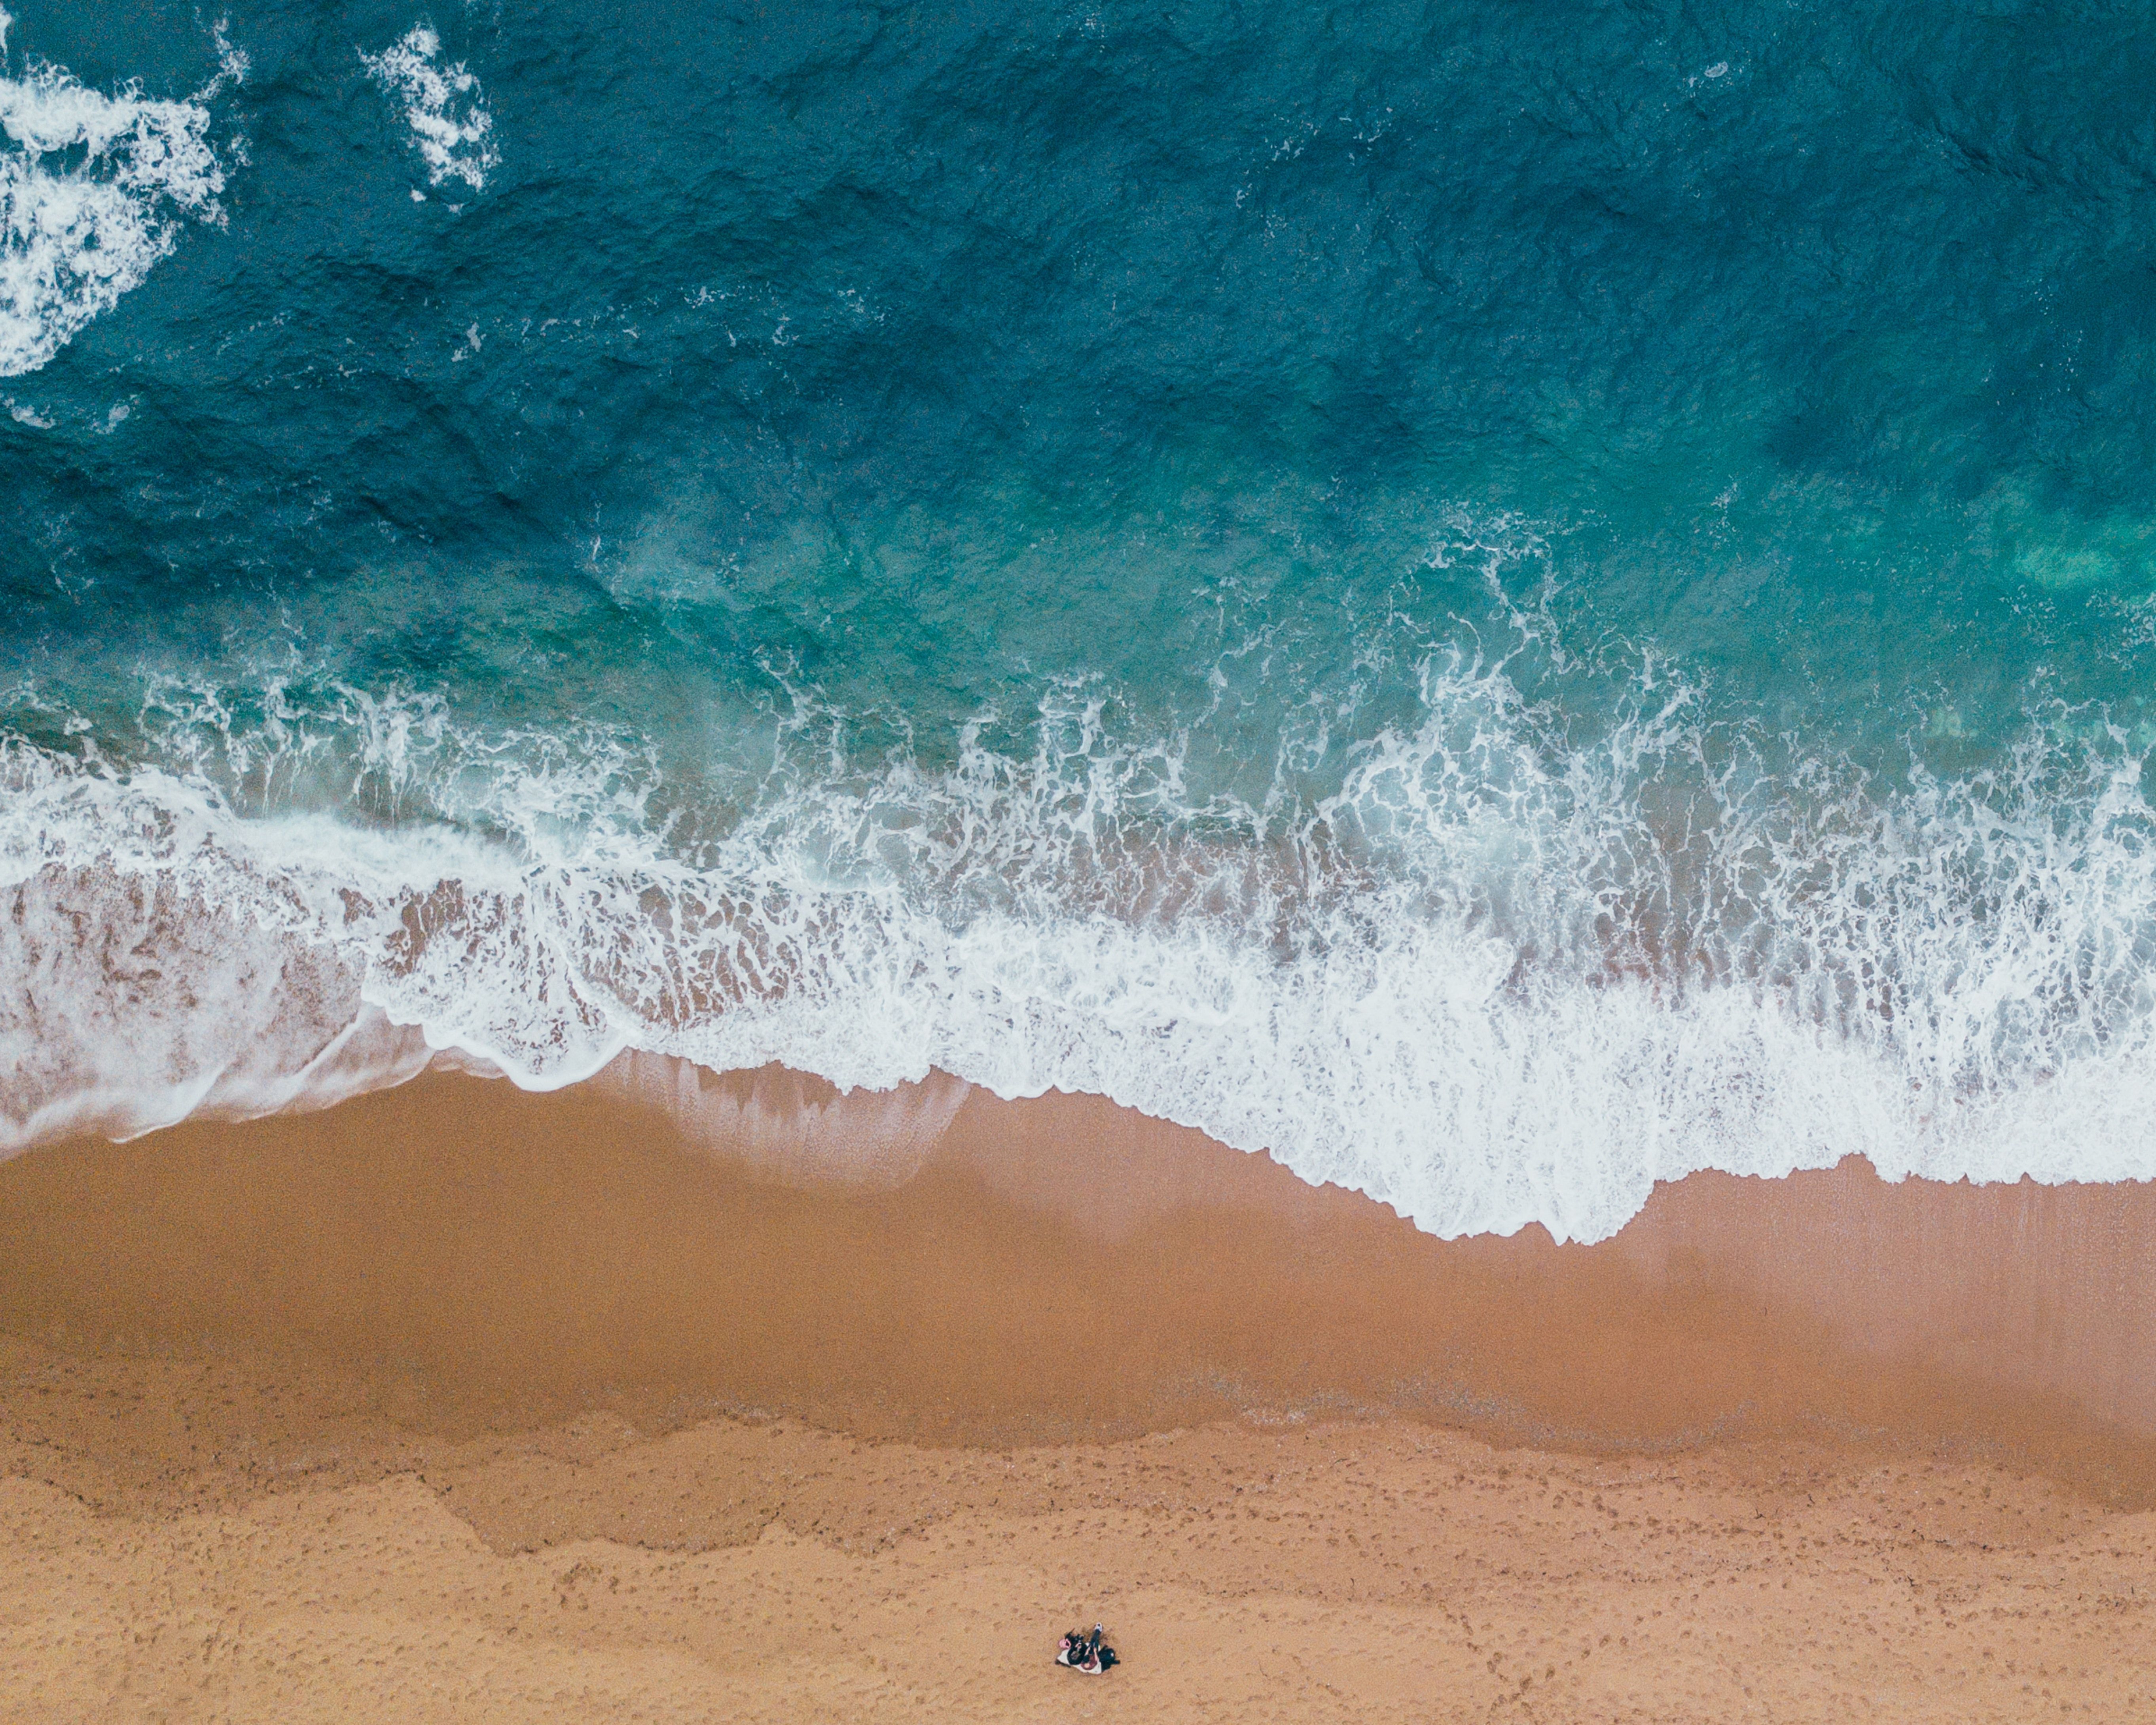 Drone view, aerial view, beach, sand and water HD photo by Rich Lock. Beach picture, Sea picture, Beach photo